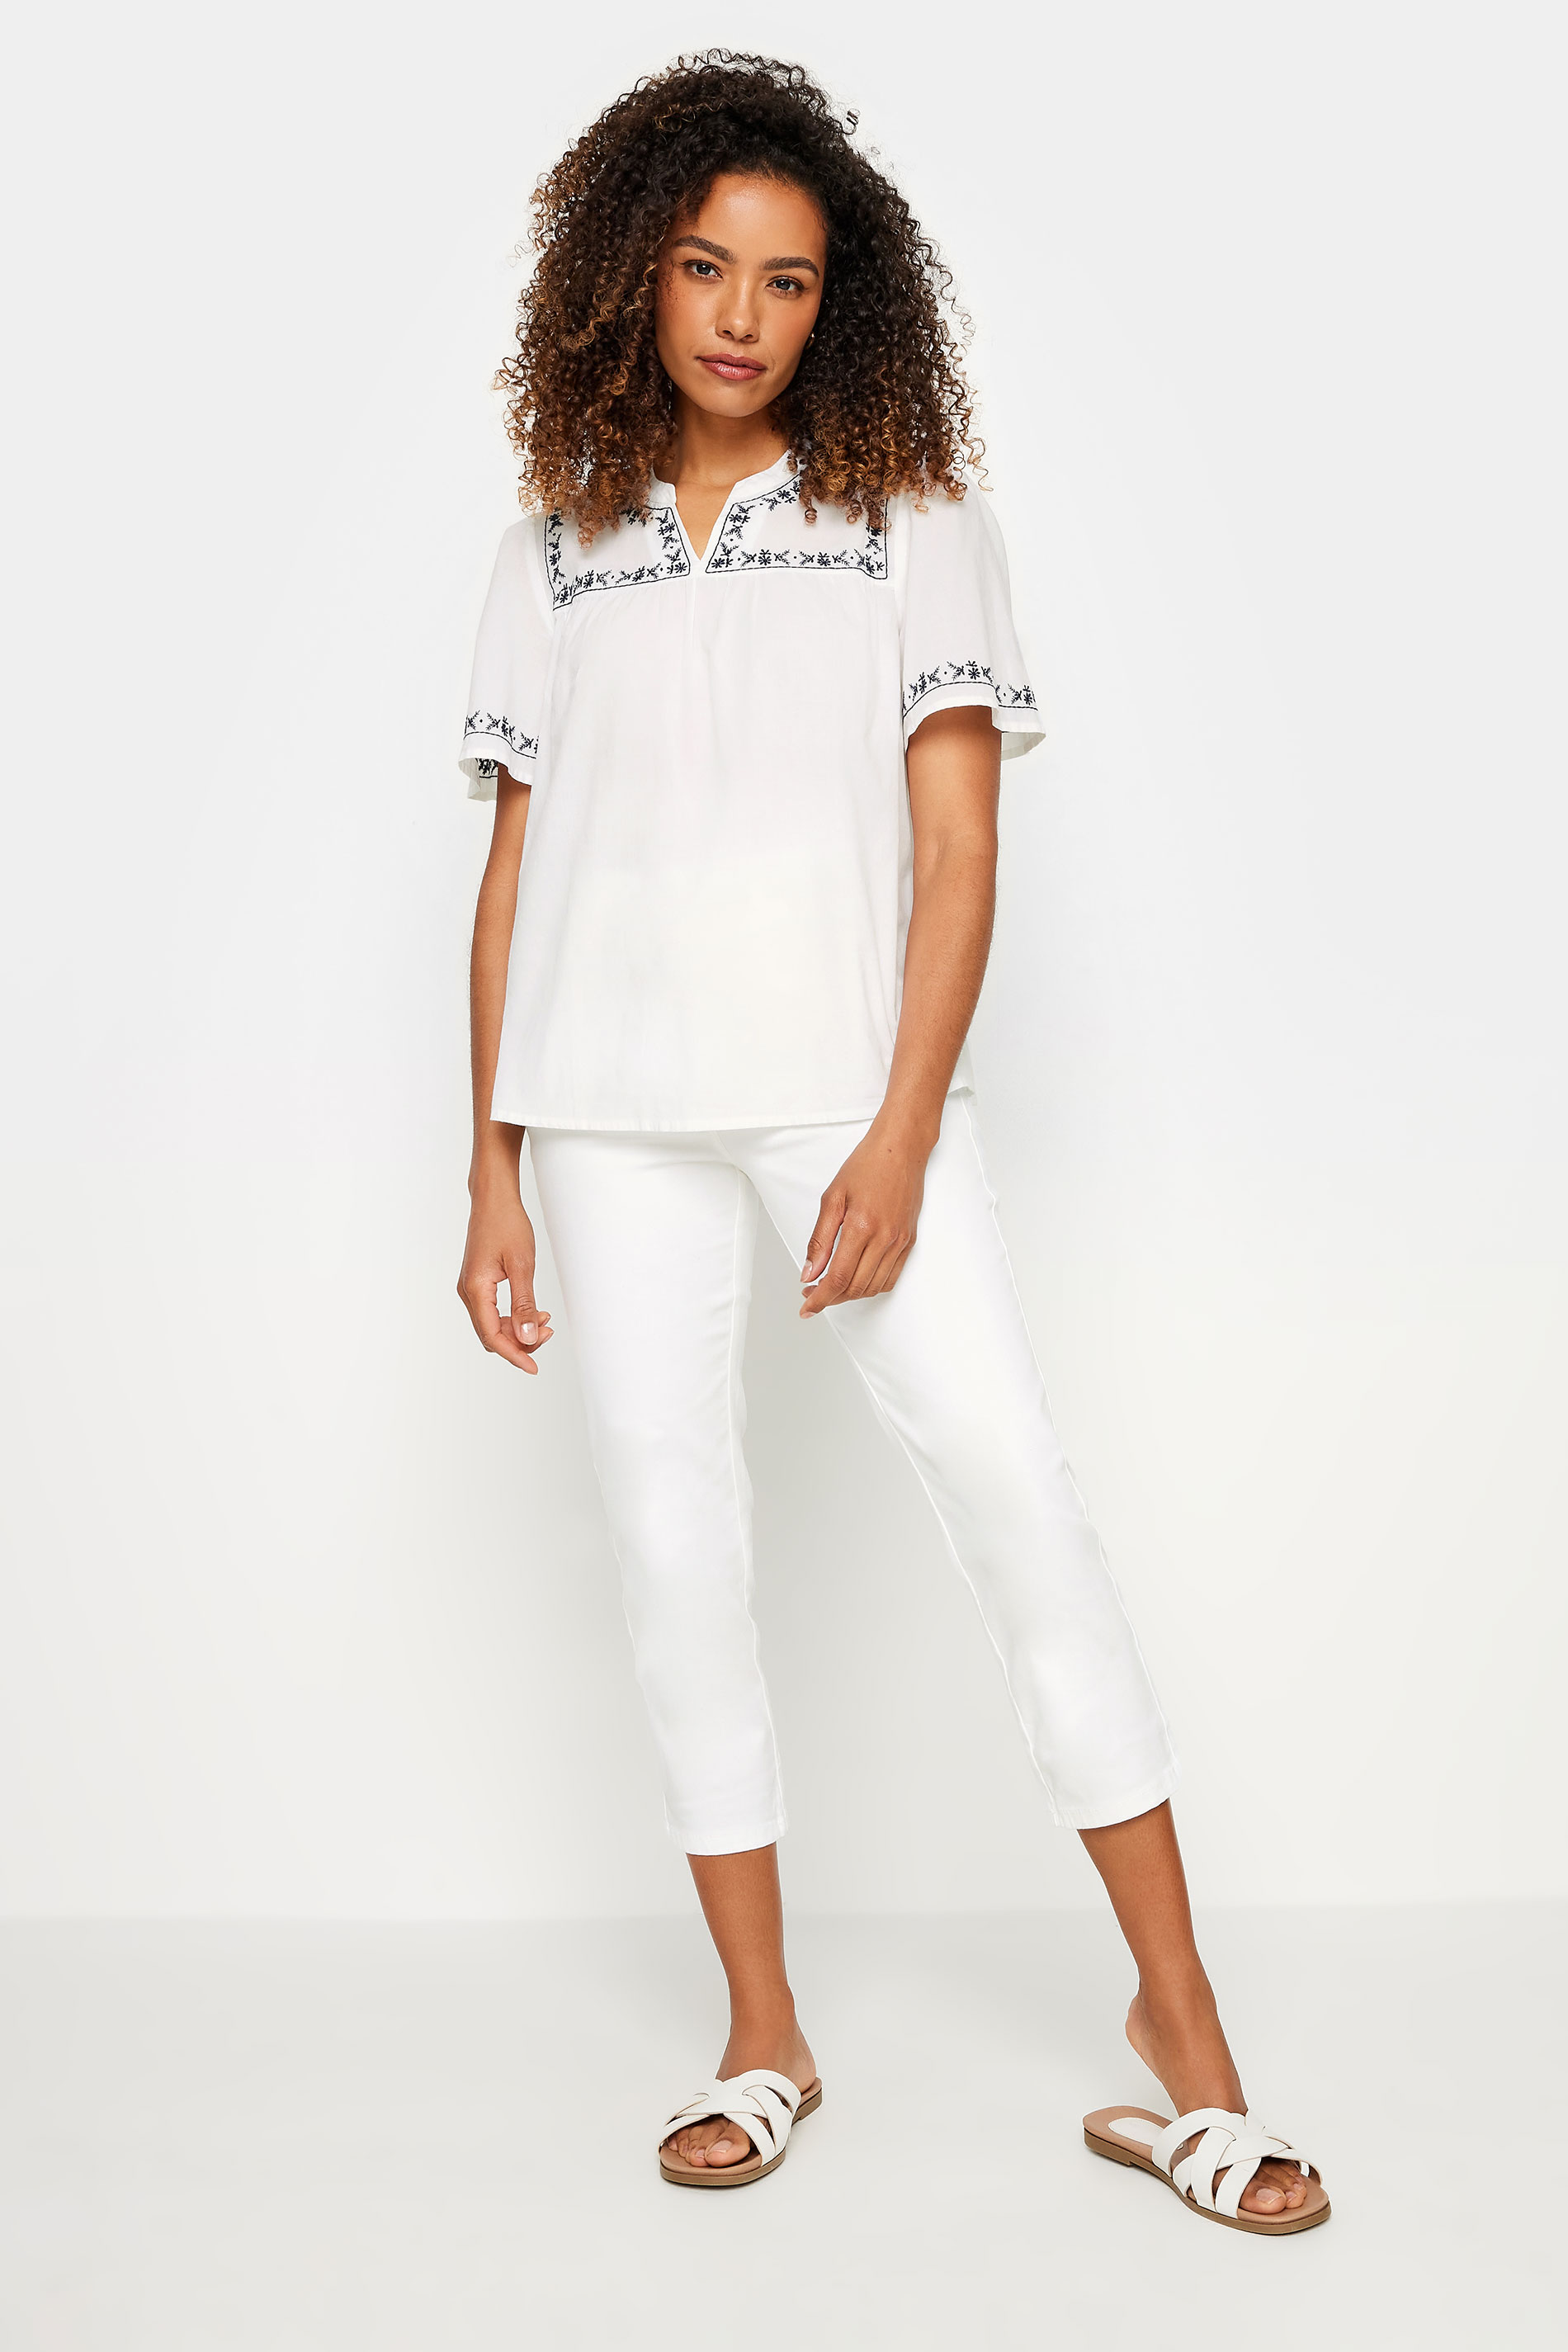 M&Co White Embroidered Cotton Dobby Blouse | M&Co 2